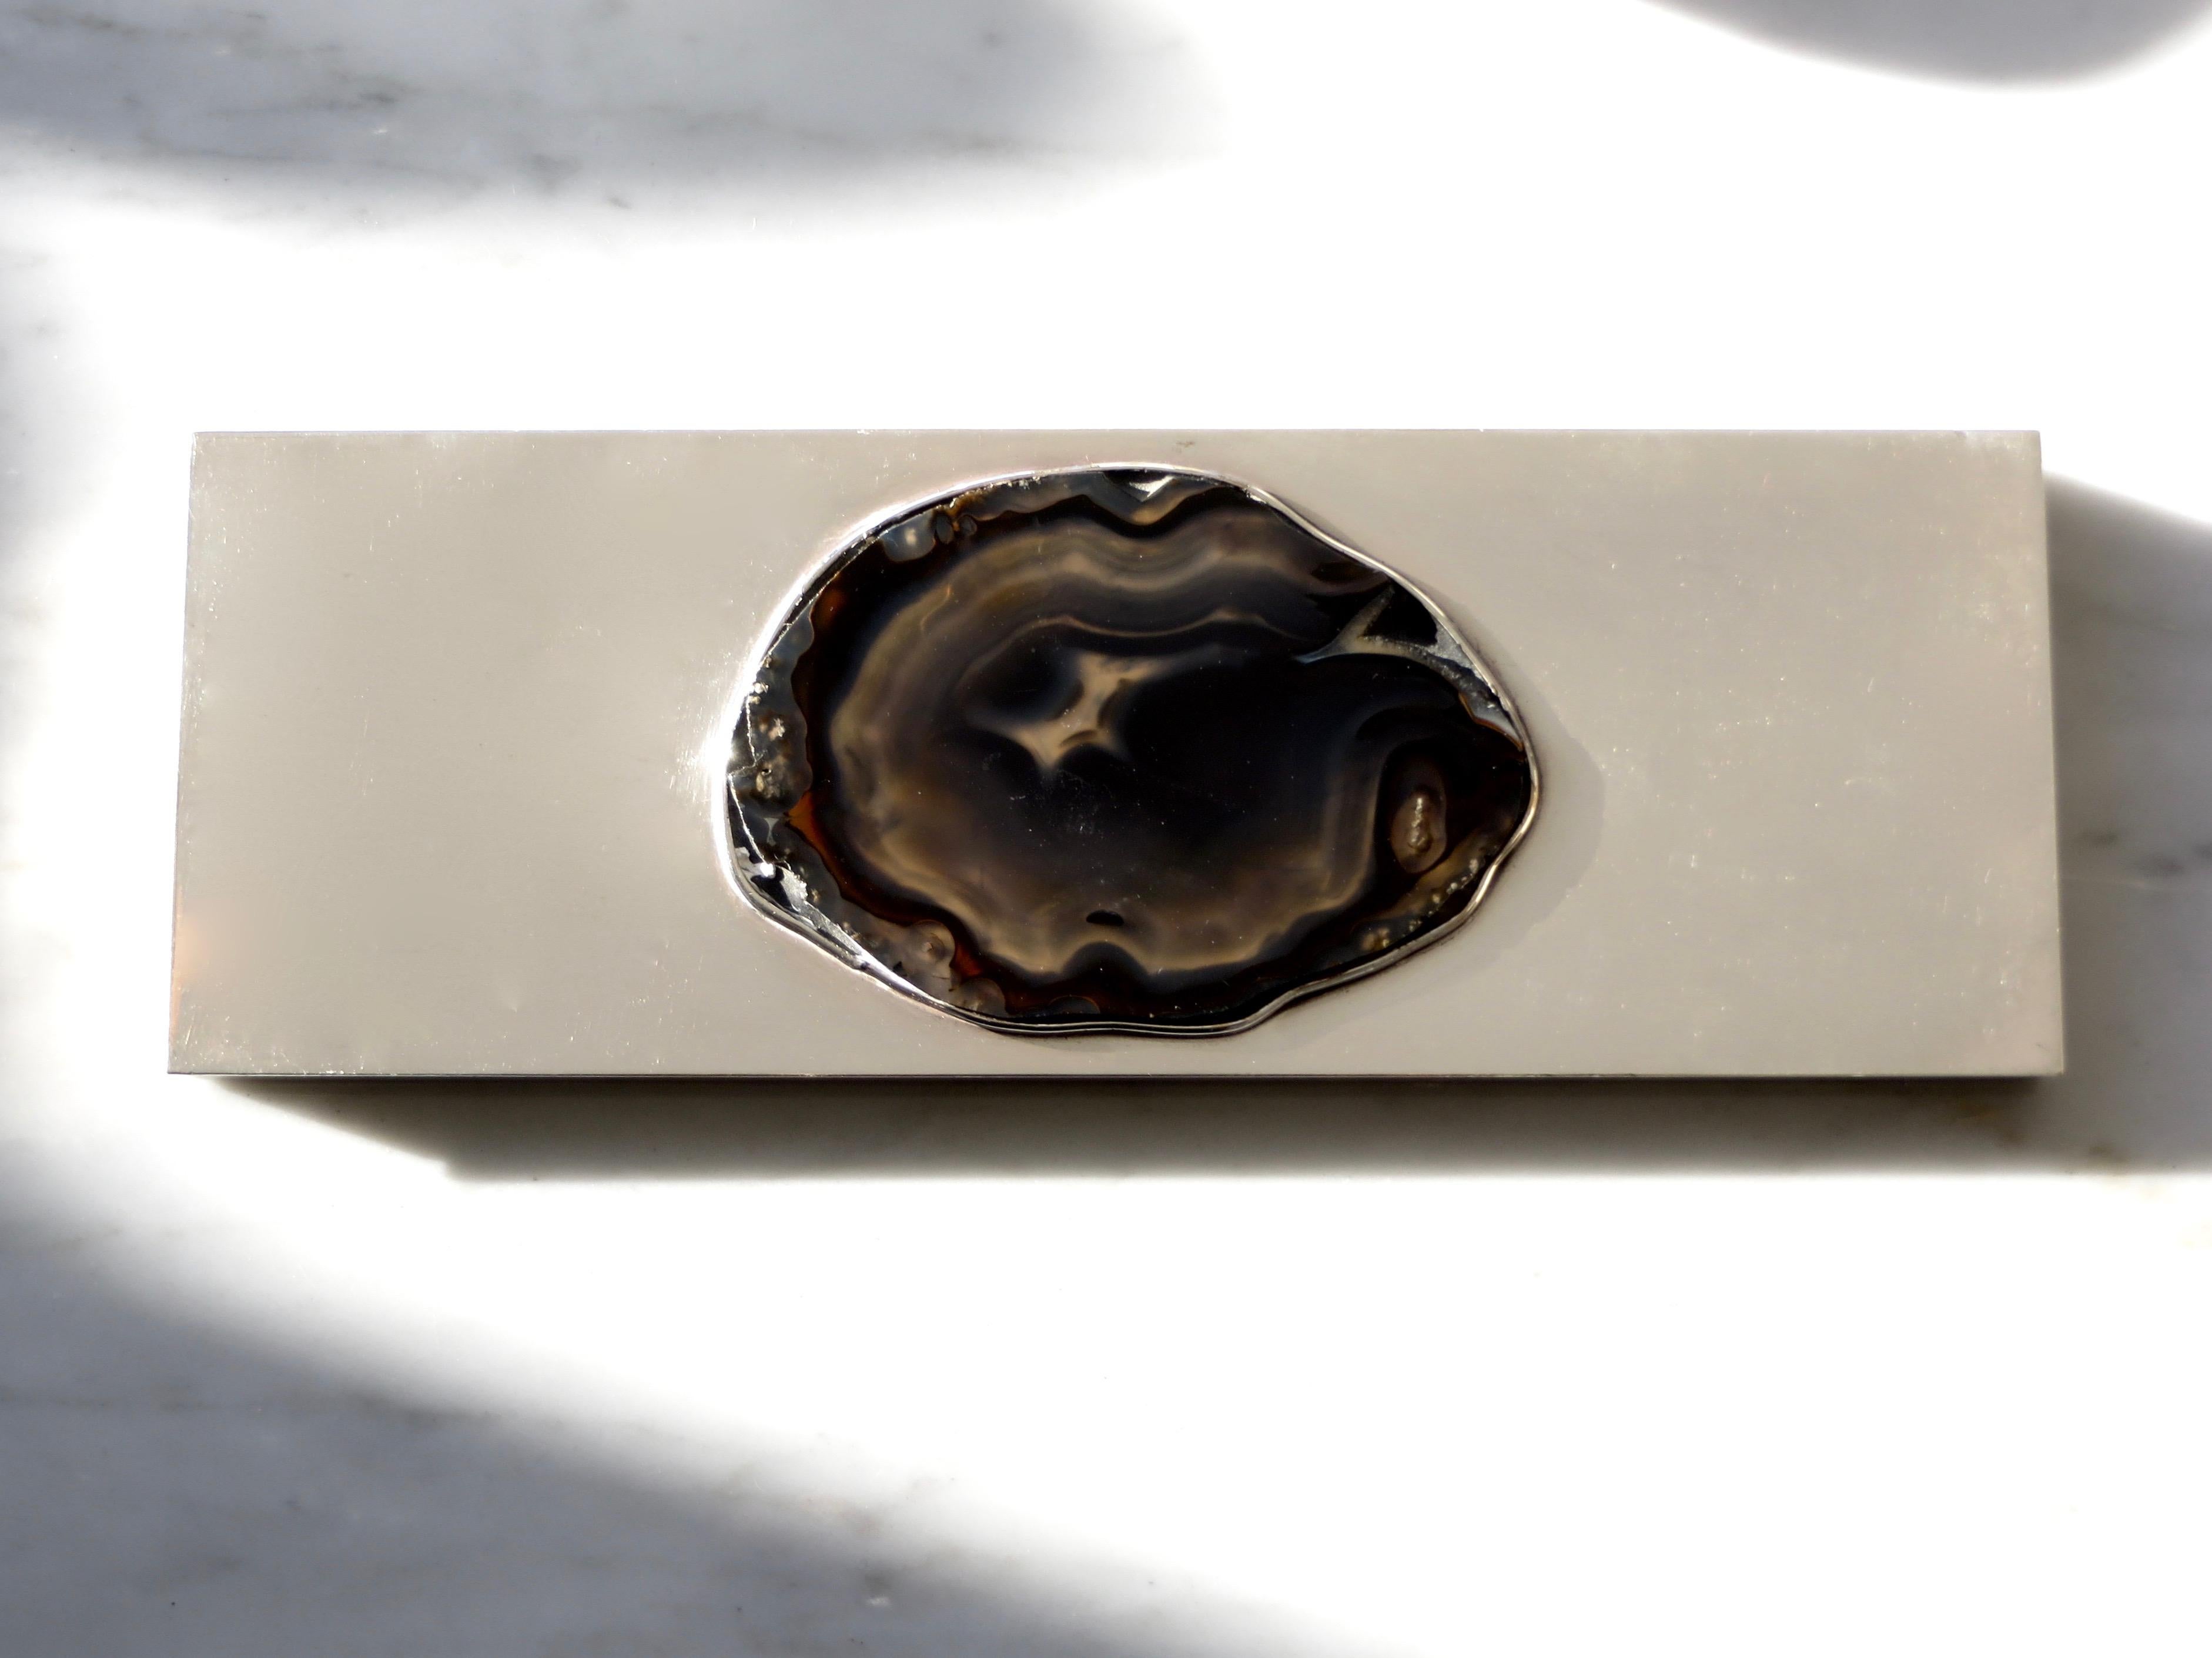 Elegant modernist 1970s silver plate and agate decorative box reminiscent French designer Maria Pergay work. 
Streamline rectangular shape with large agate in the center. No visible maker's mark.
Lined with black leather. 
A scratch mark on the